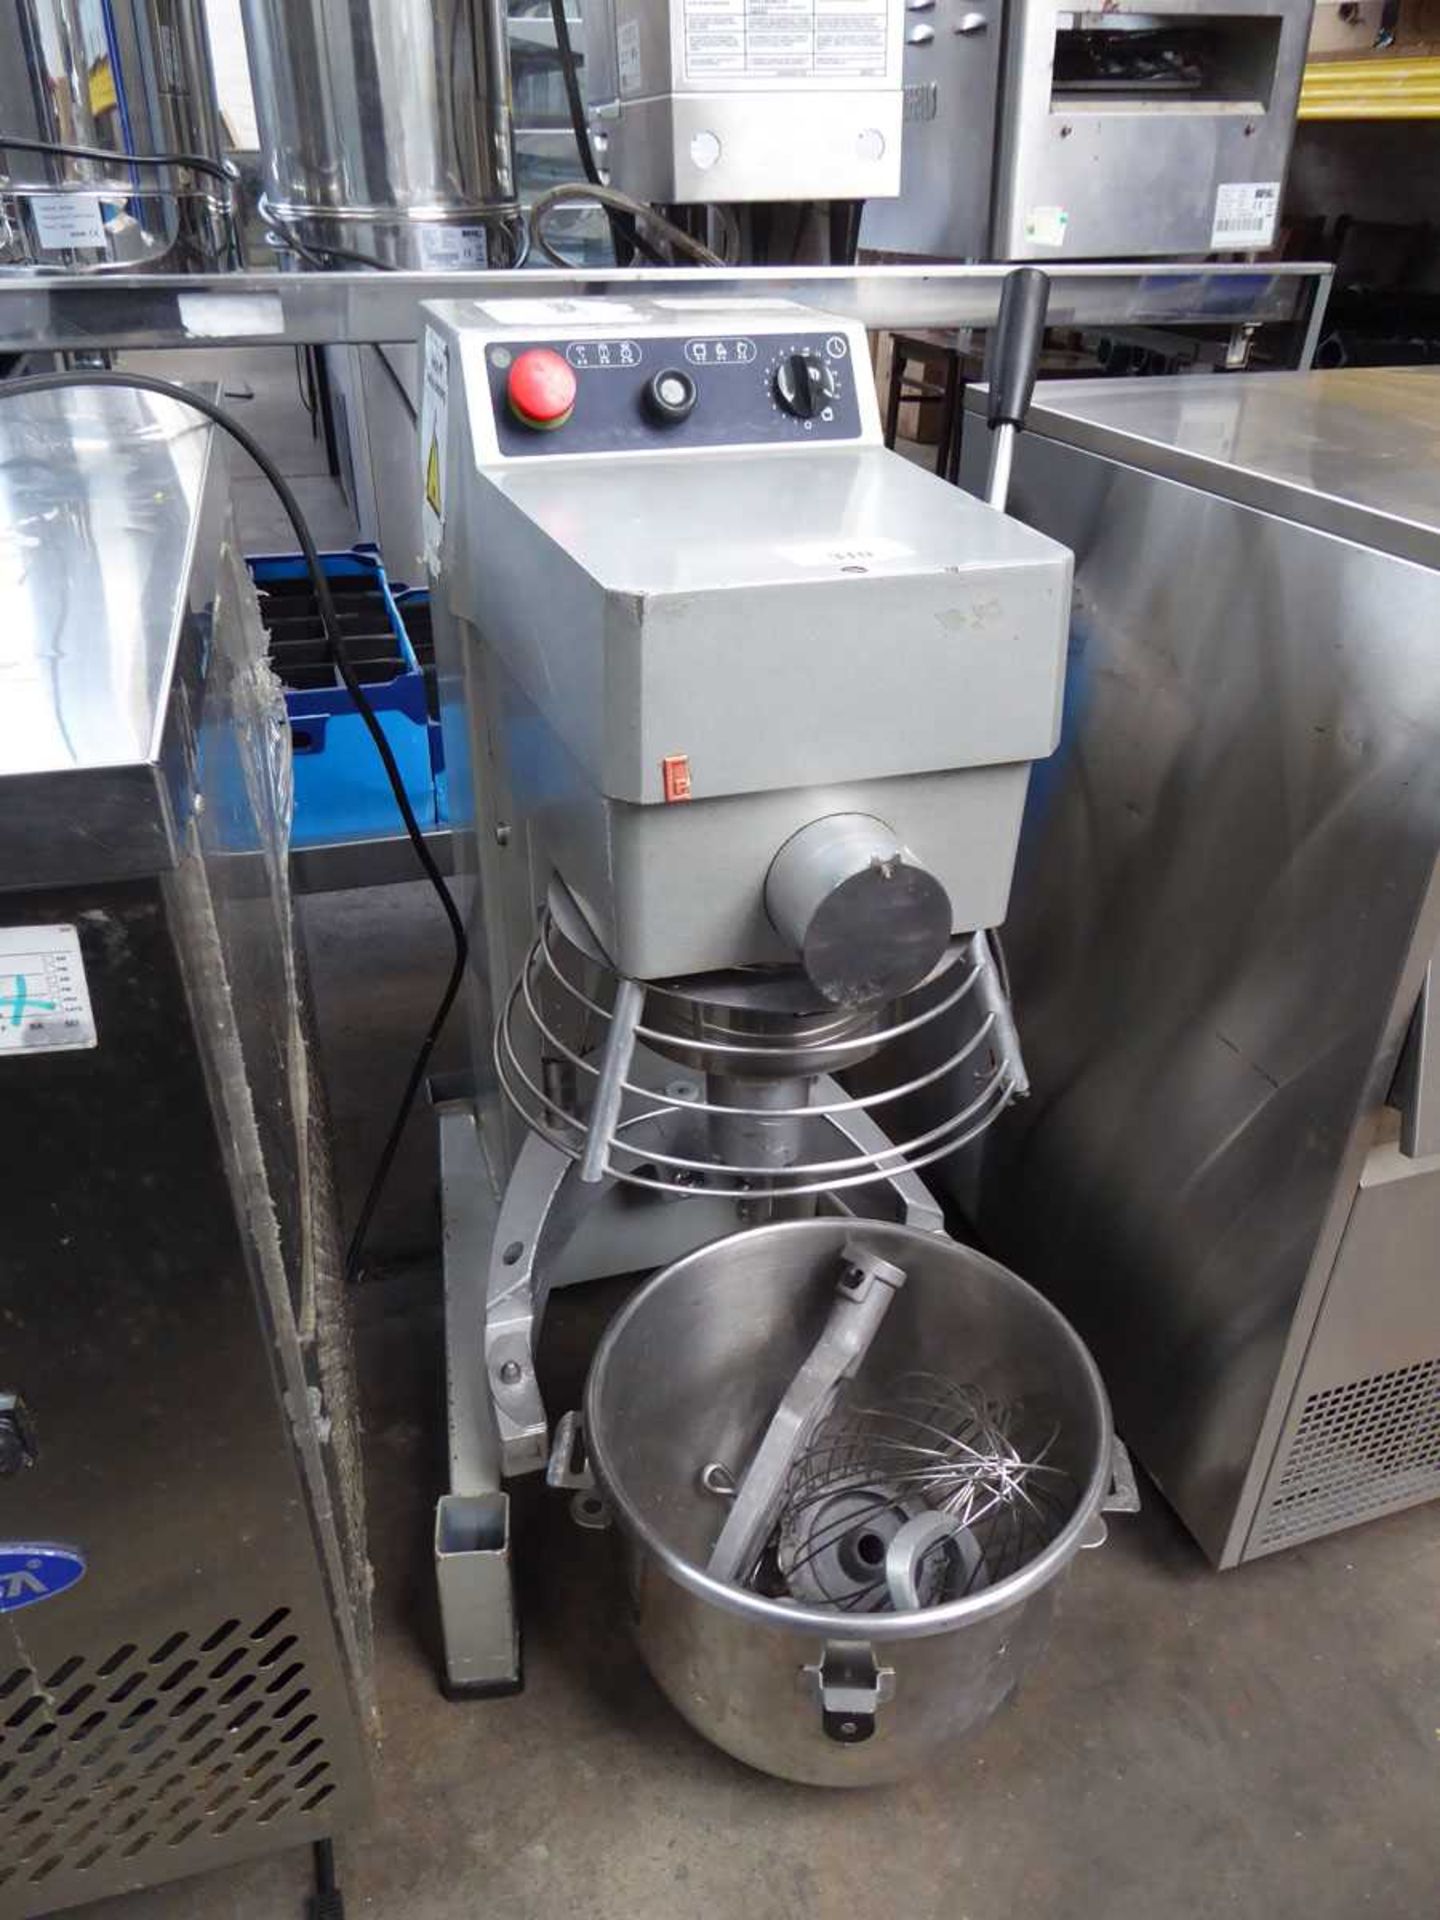 +VAT Crypto Peerless large commercial mixer with bowl, 3 attachments and safety guard